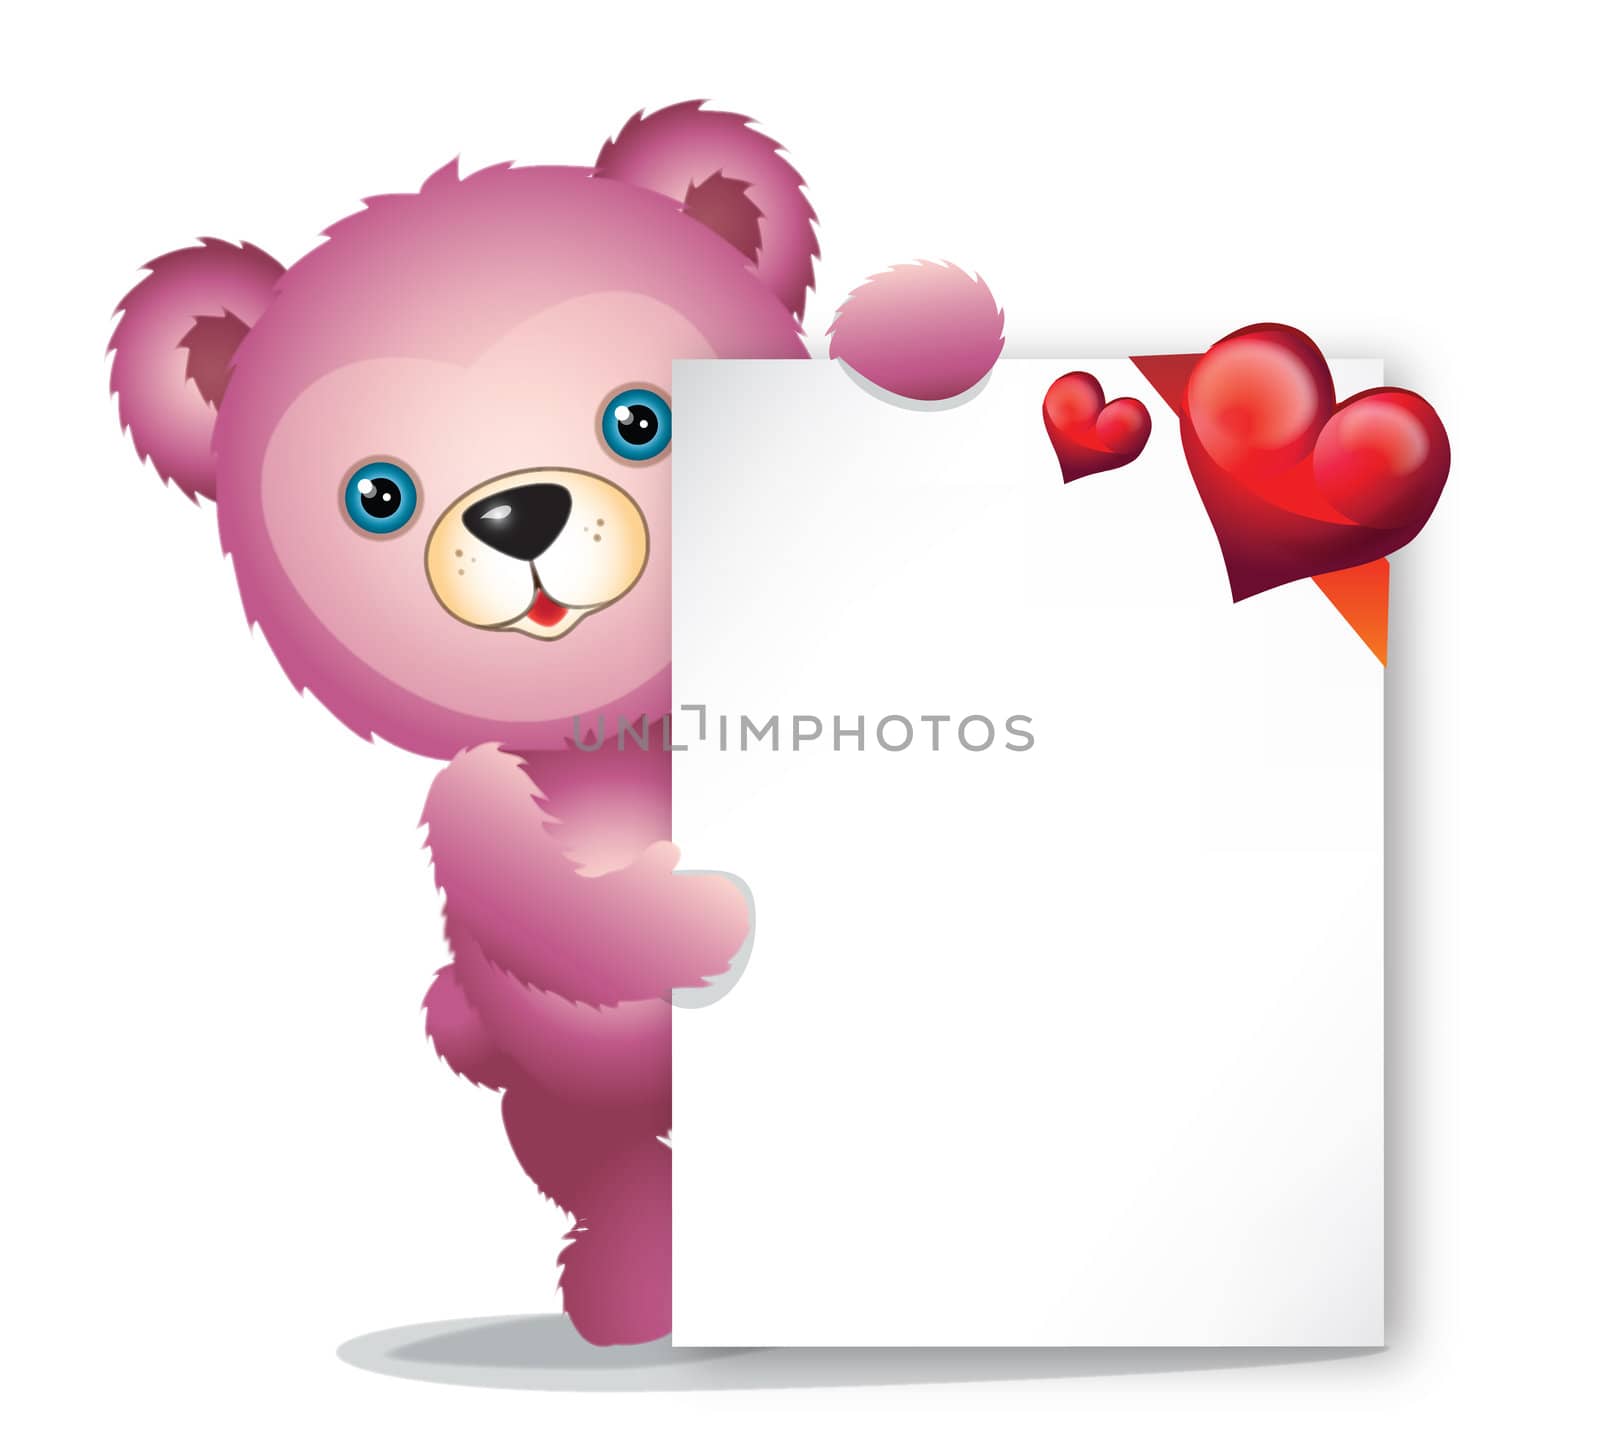 pink Teddy bear with greeting card with red hearts